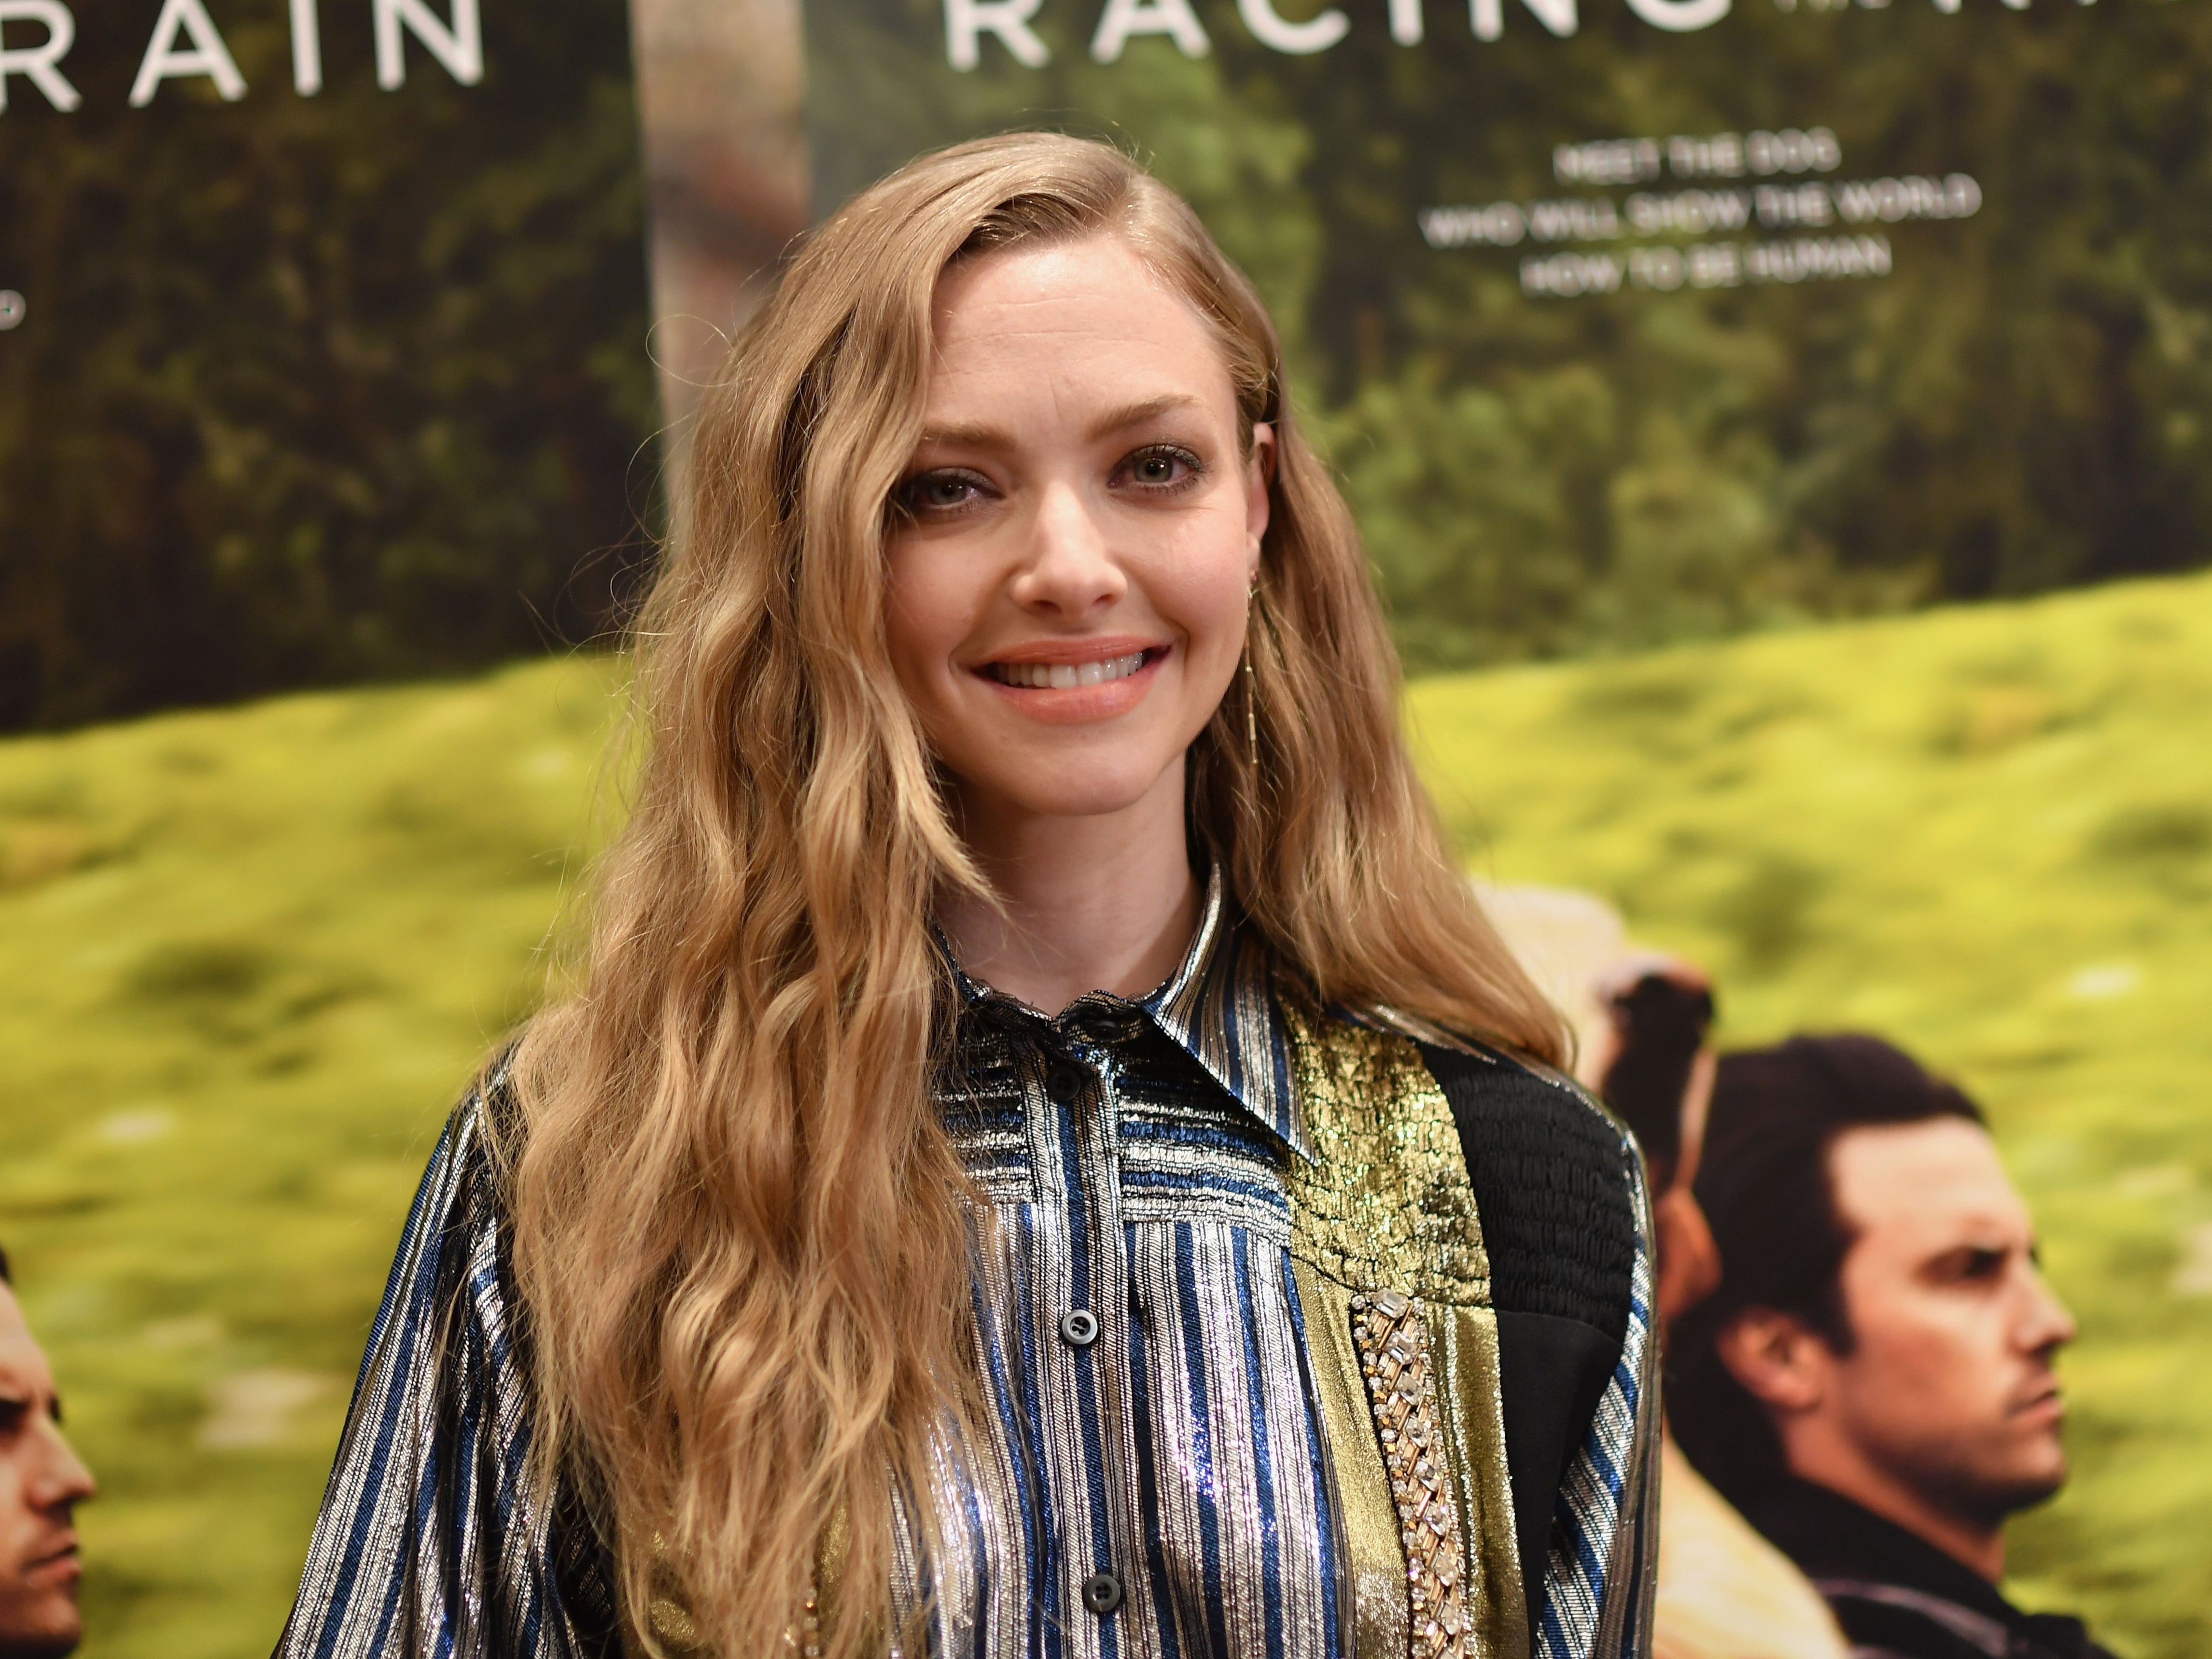 Amanda Seyfried at the New York premiere of ‘The Art of Racing in the Rain’ on 5 August 2019 in New York City